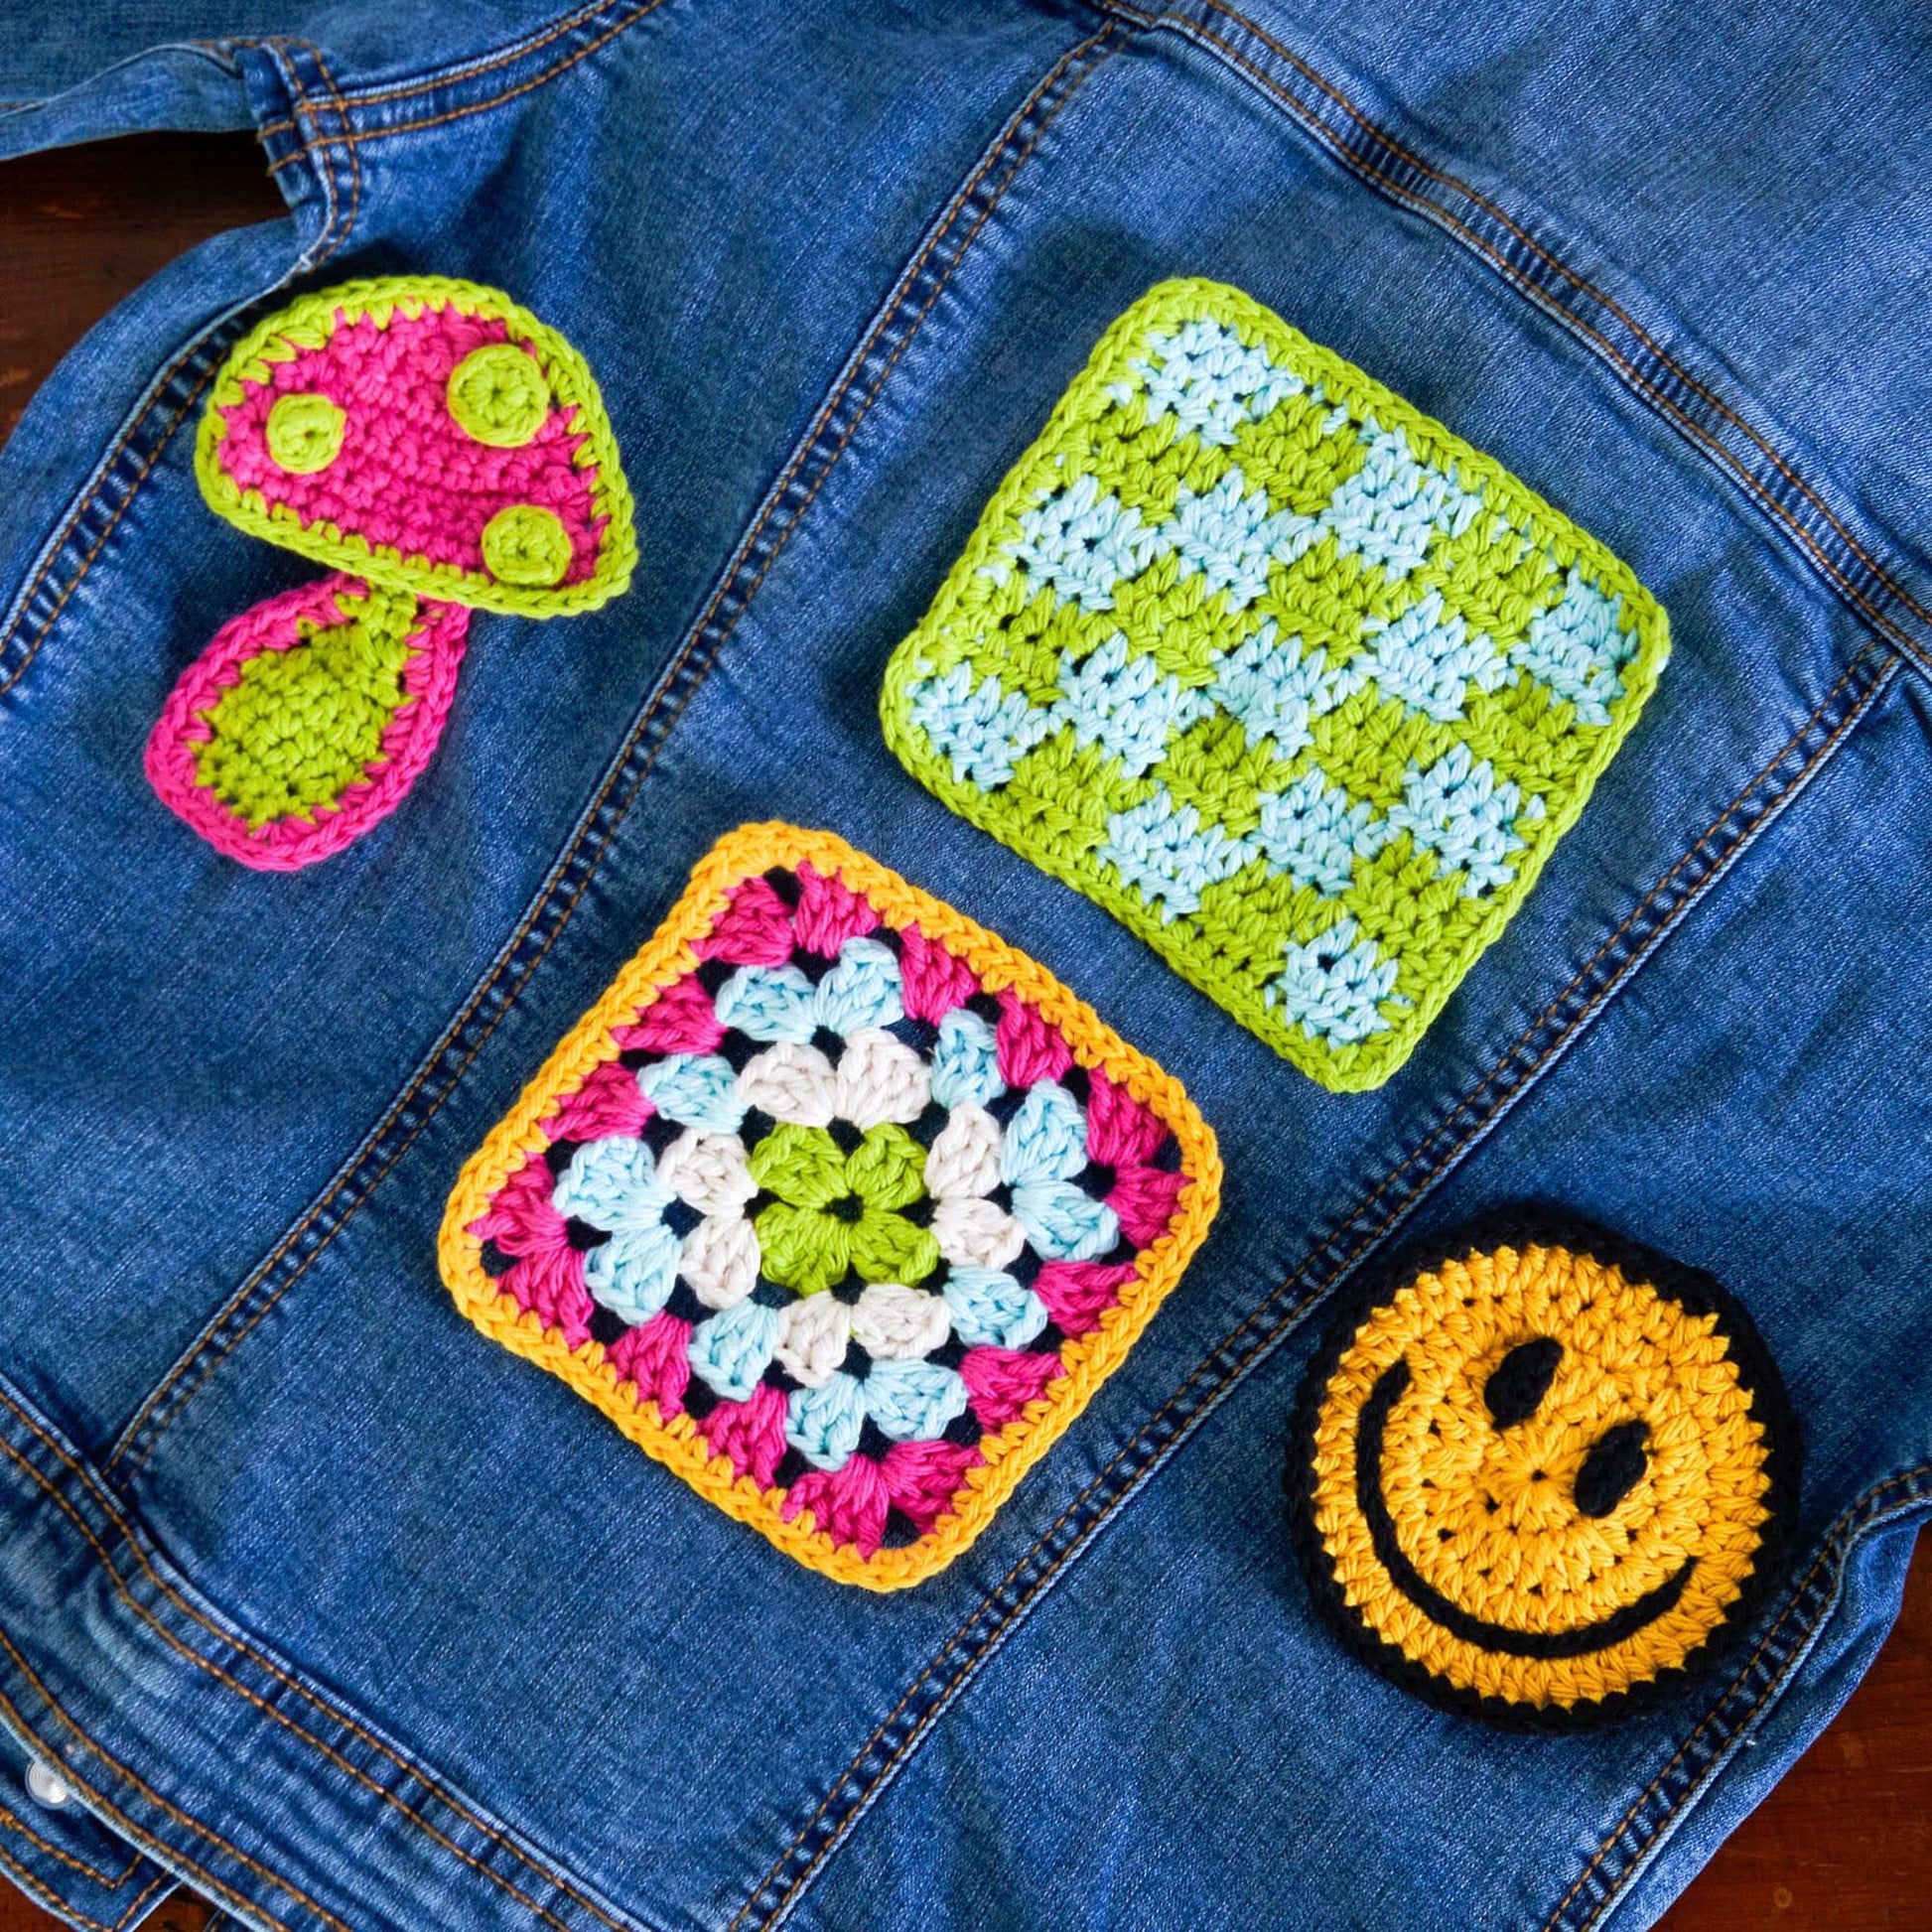 How to Sew a Patch {plus a no-sew trick for pocket patches}